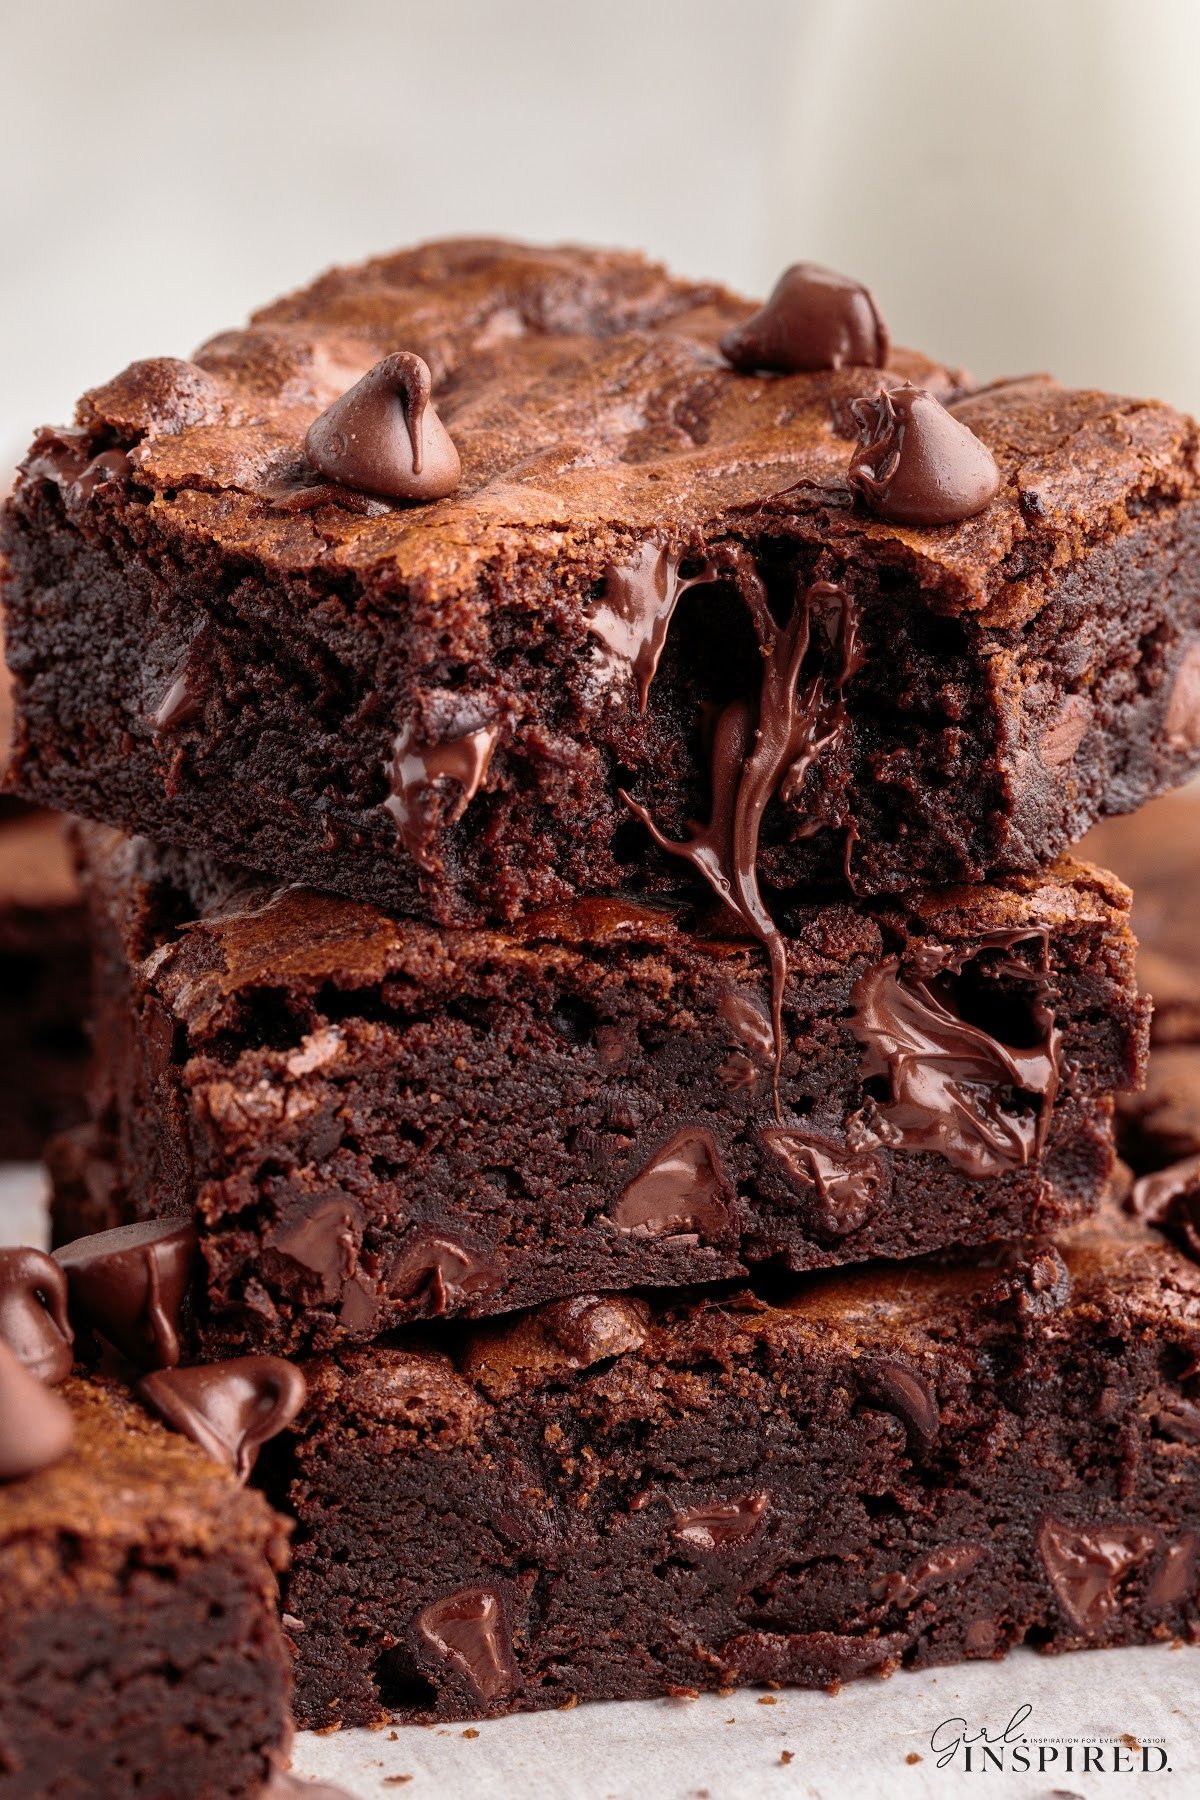 Thick and fudgy homemade brownies with chocolate chips.